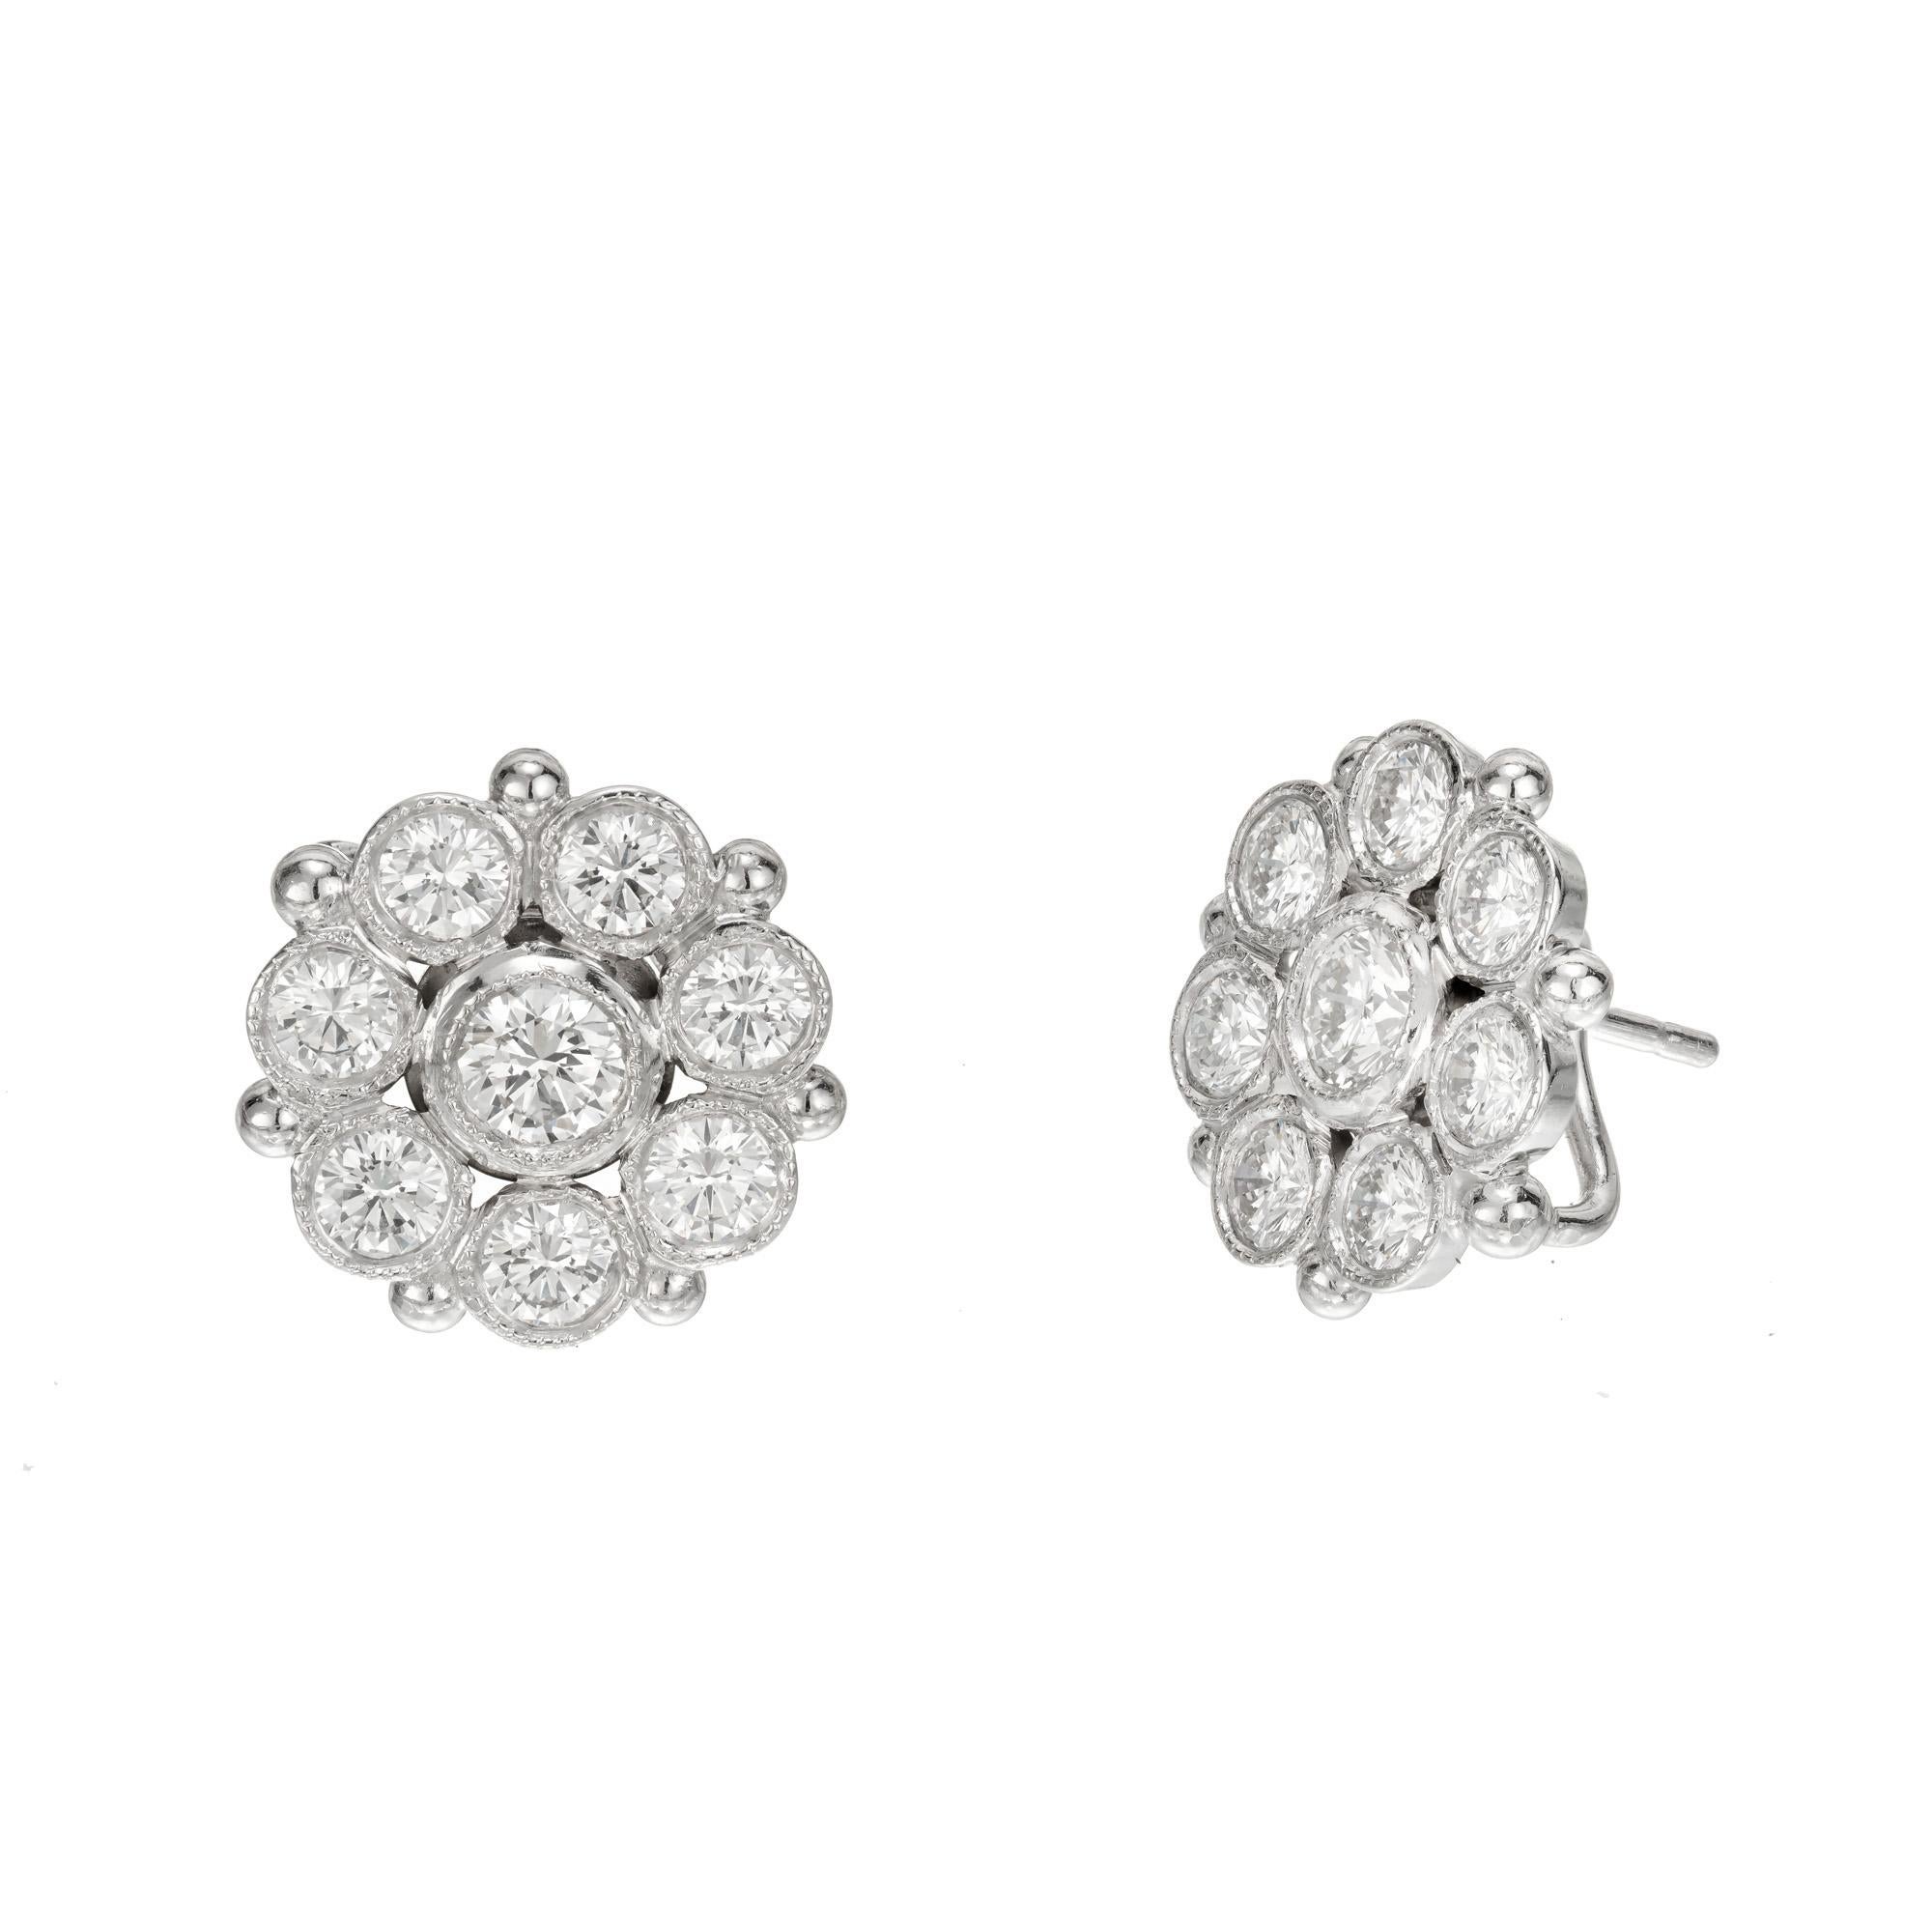 Featherstone diamond ball flower top earrings. 16 round brilliant cut diamonds set in a platinum flower top setting. Each earring has a hinge to ad a gemstone or pearl dangle. 

16 round brilliant cut diamonds, G VS approx. 2.60cts
Platinum